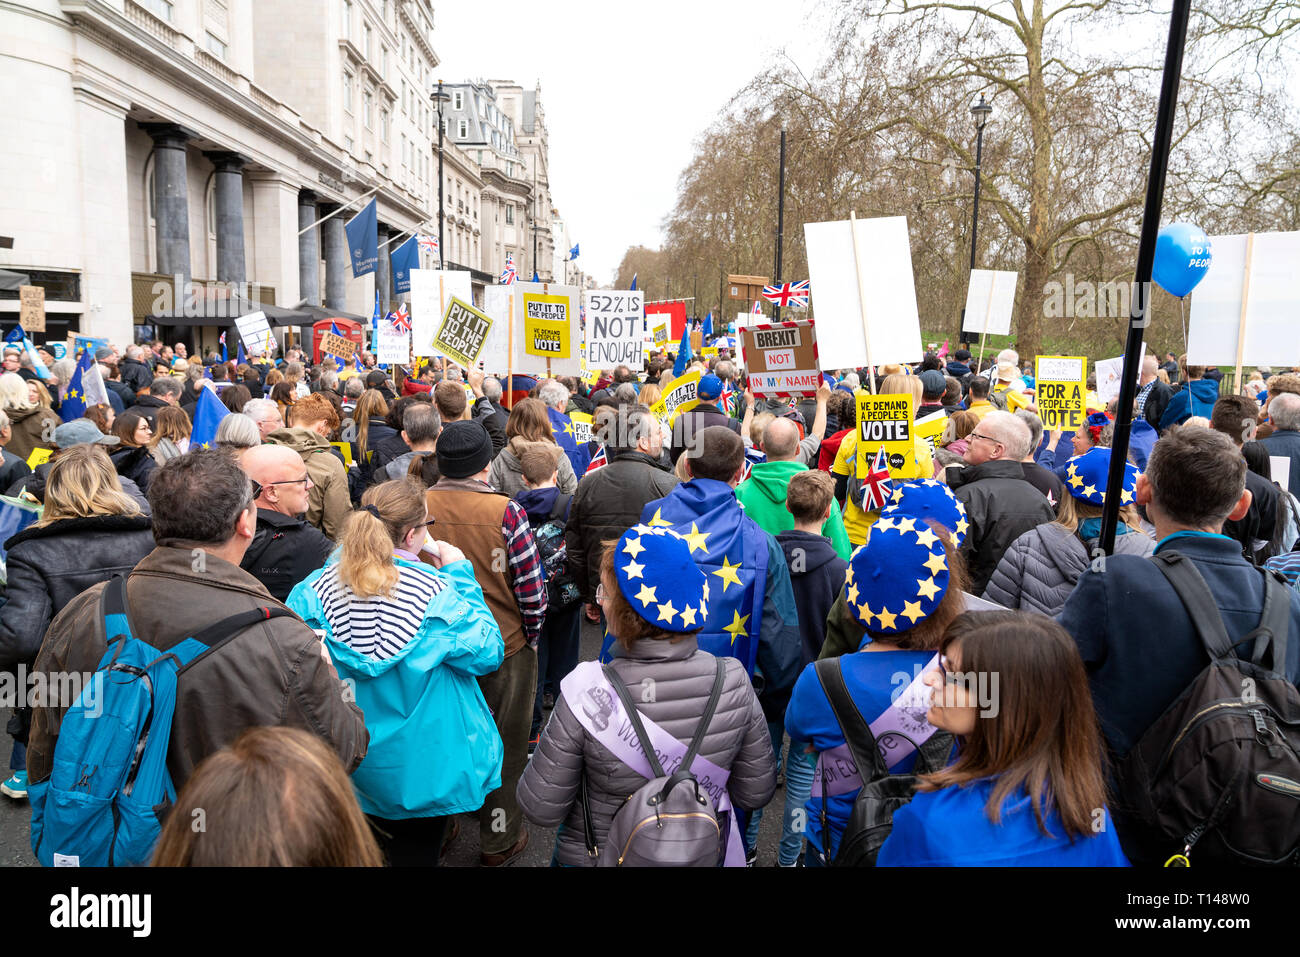 London, UK. 23rd March 2019. Thousands of people come to a demonstration calling for a second referendum on Britain exit from EU, known as Brexit. Stock Photo